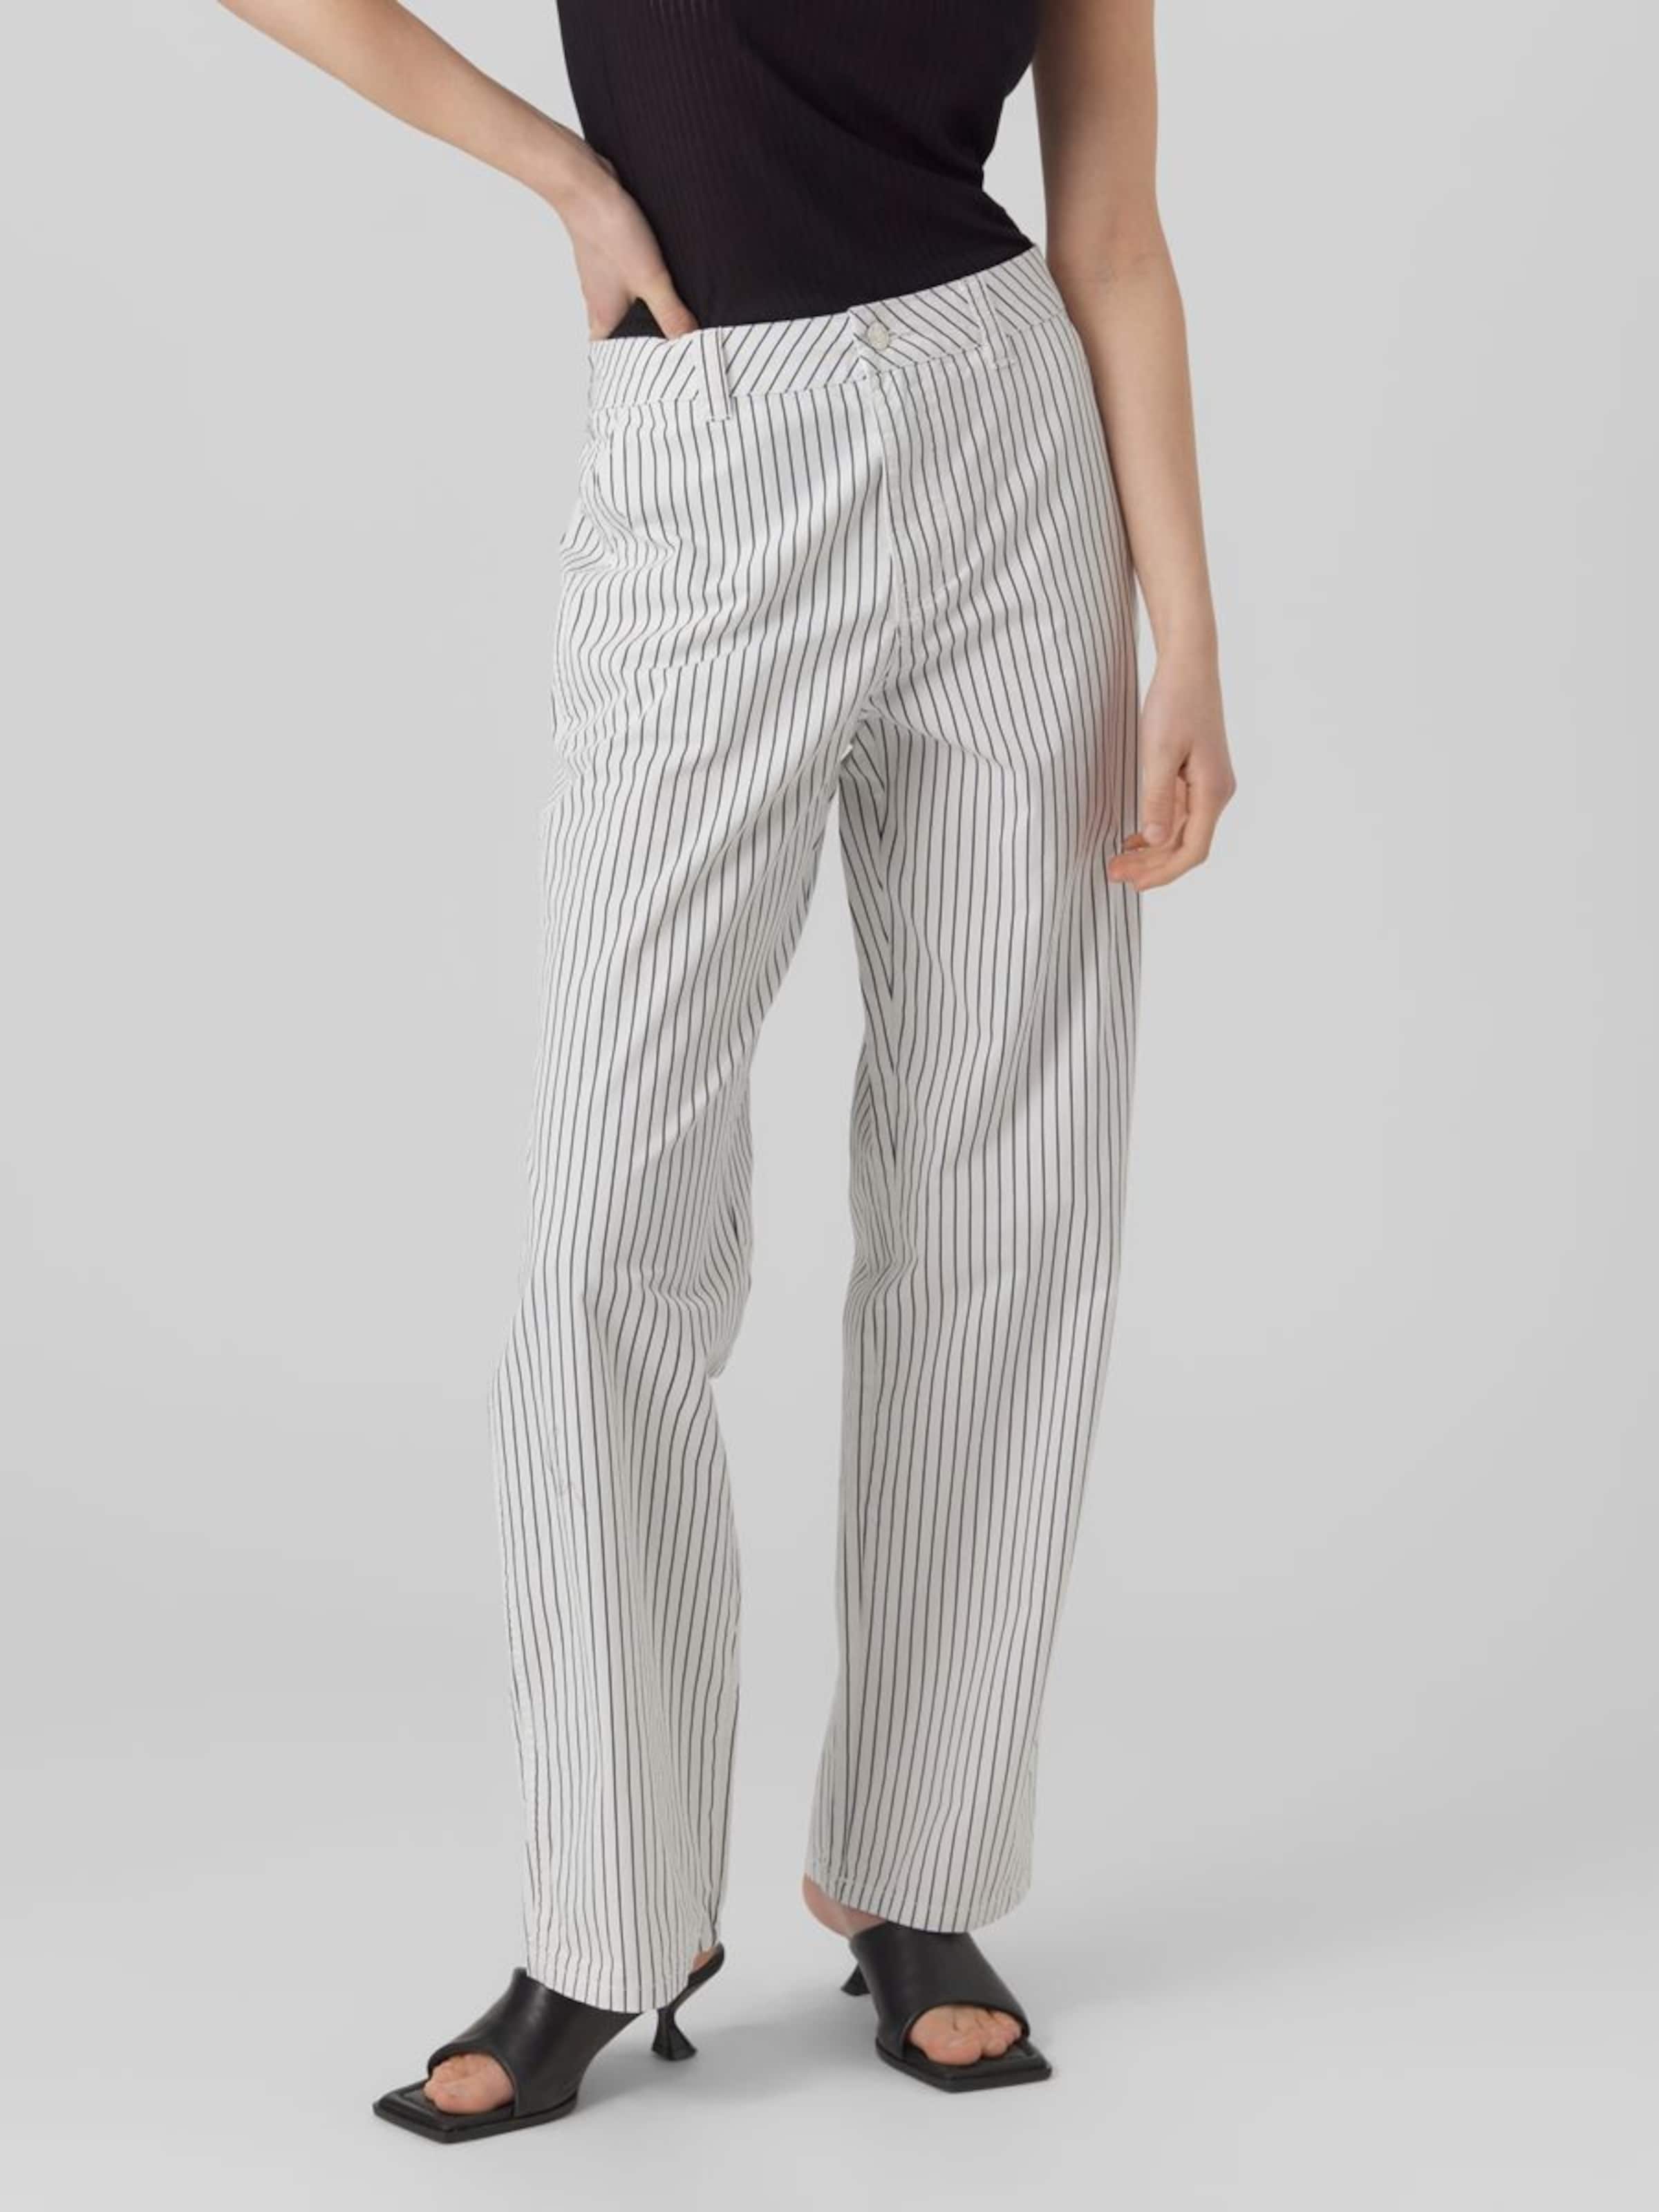 Buy Pink High Rise Striped Pants For Women Online in India  VeroModa